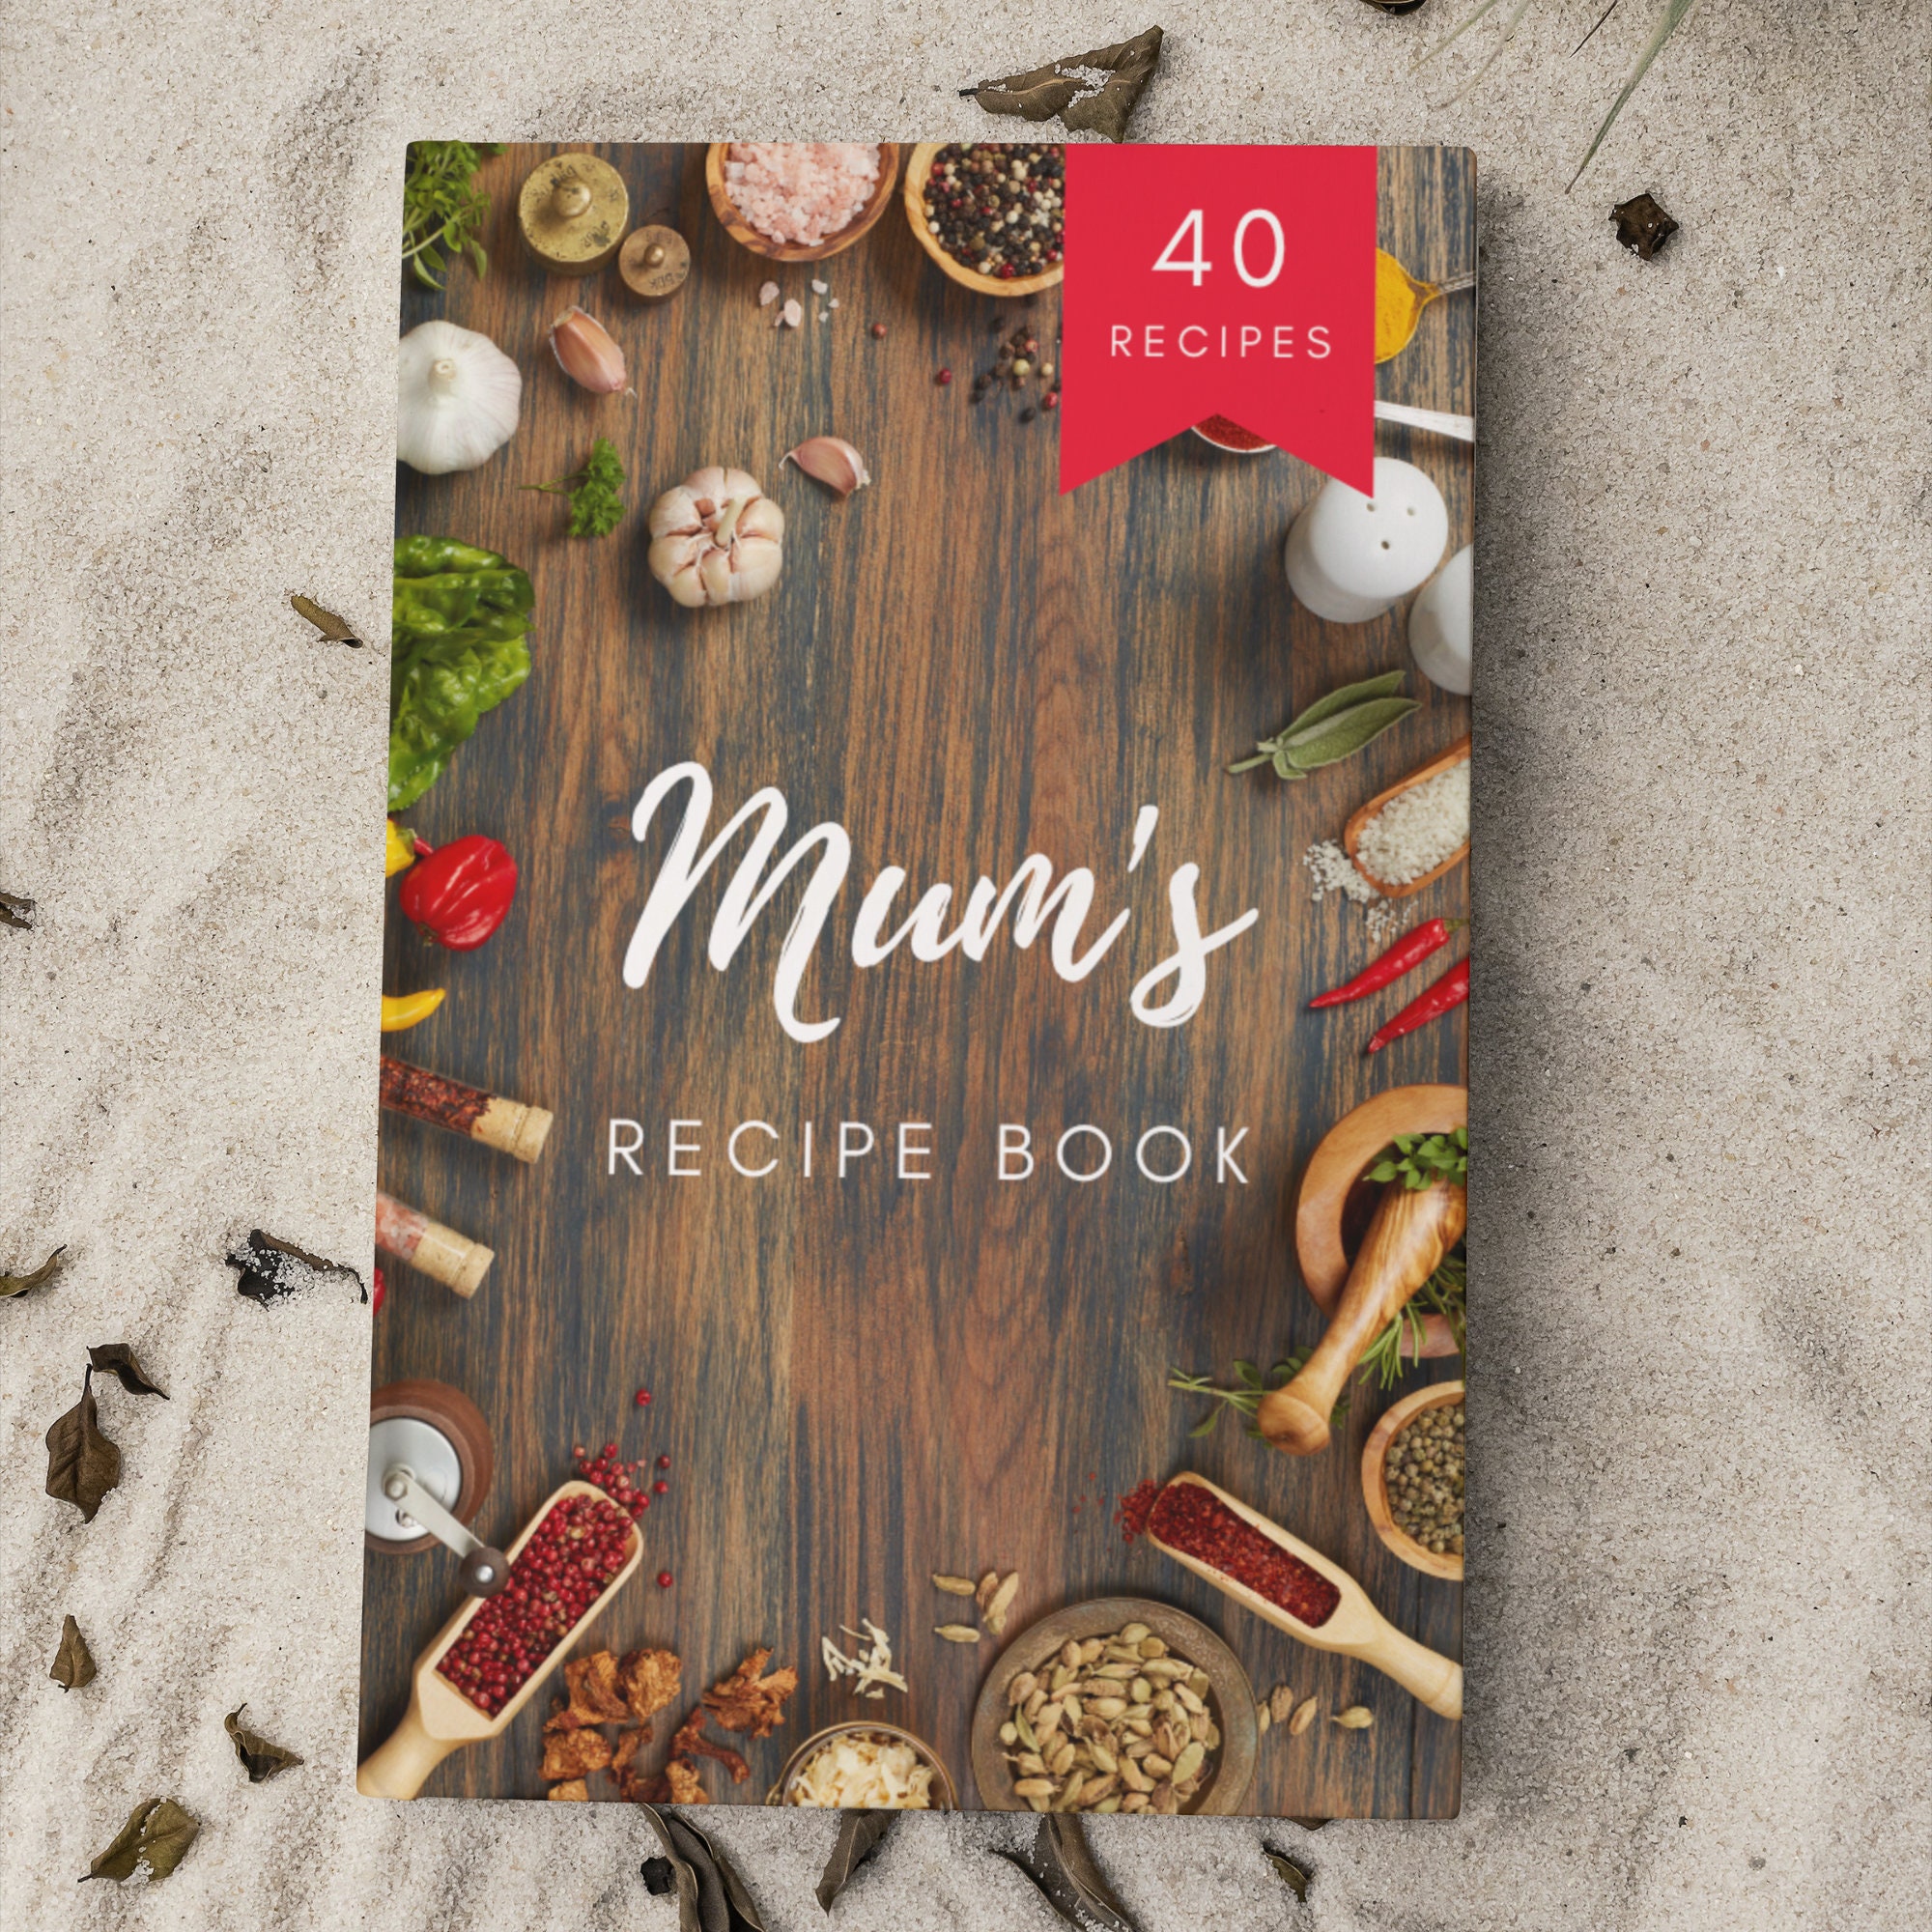 Stream +% Shit I Can Cook - Mom's Recipe Book To Write In Your Own